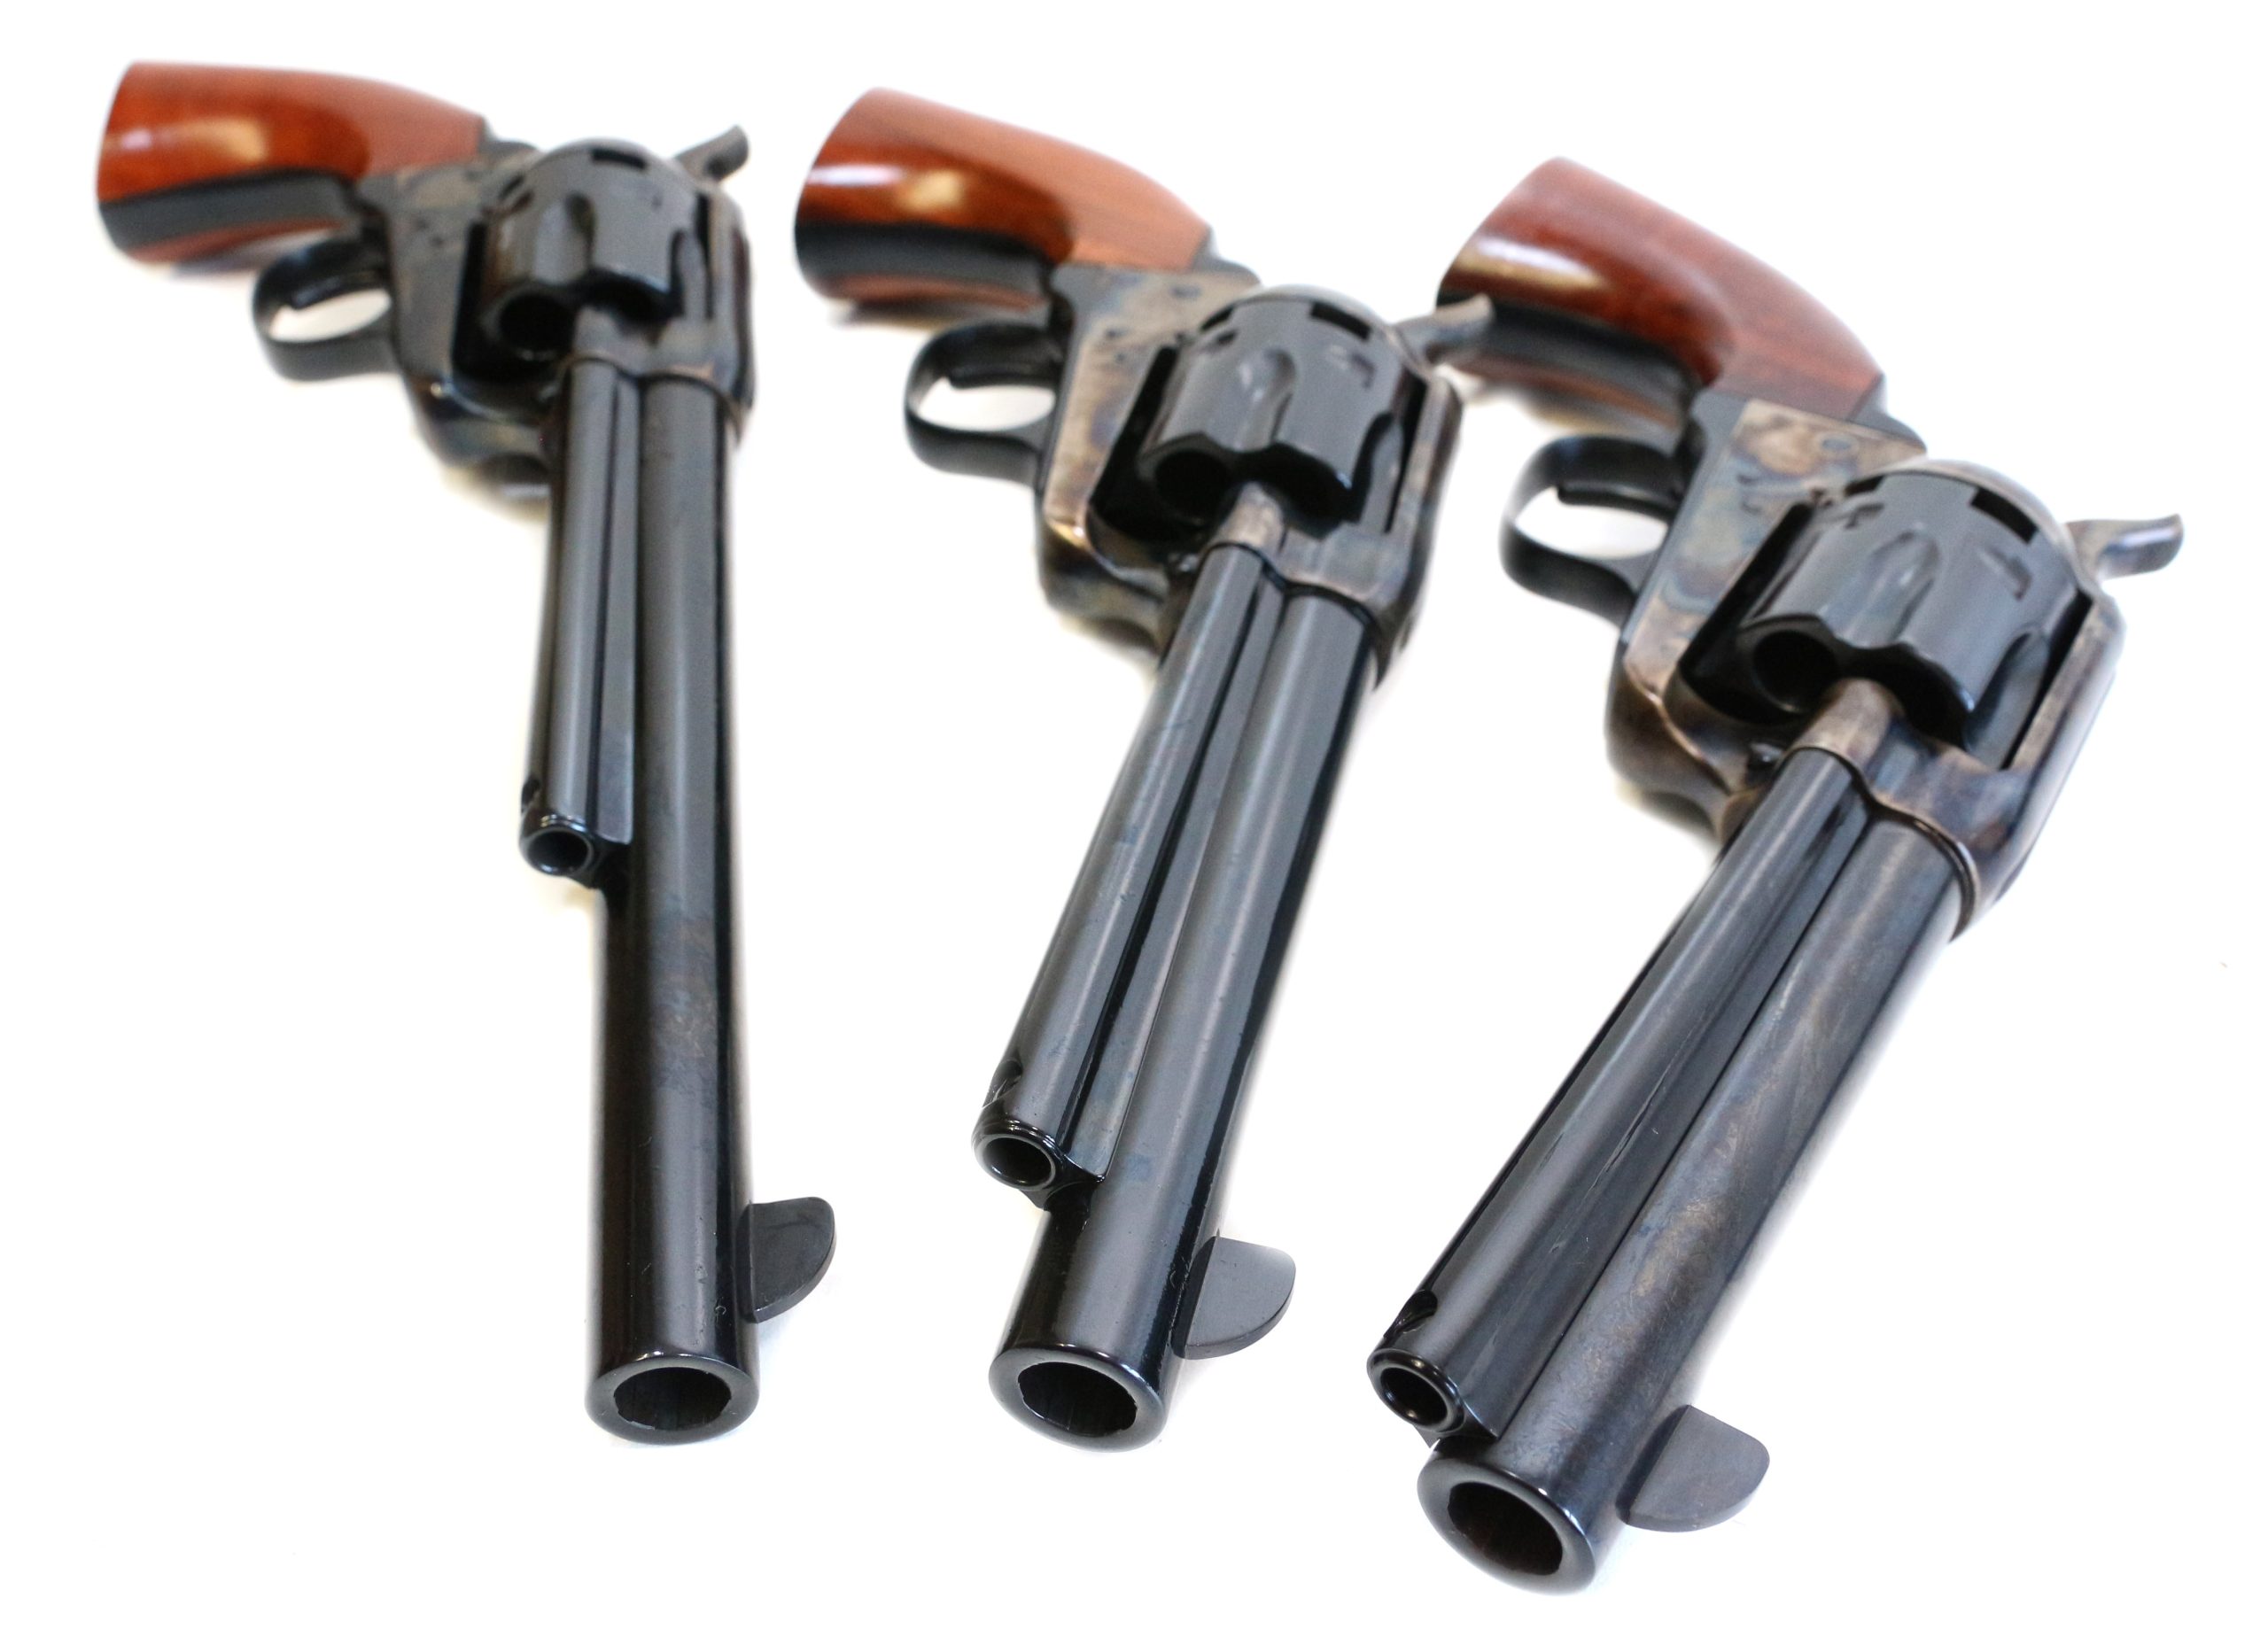 Three Colt Model 1873 Single Action Army Percussion Revolvers